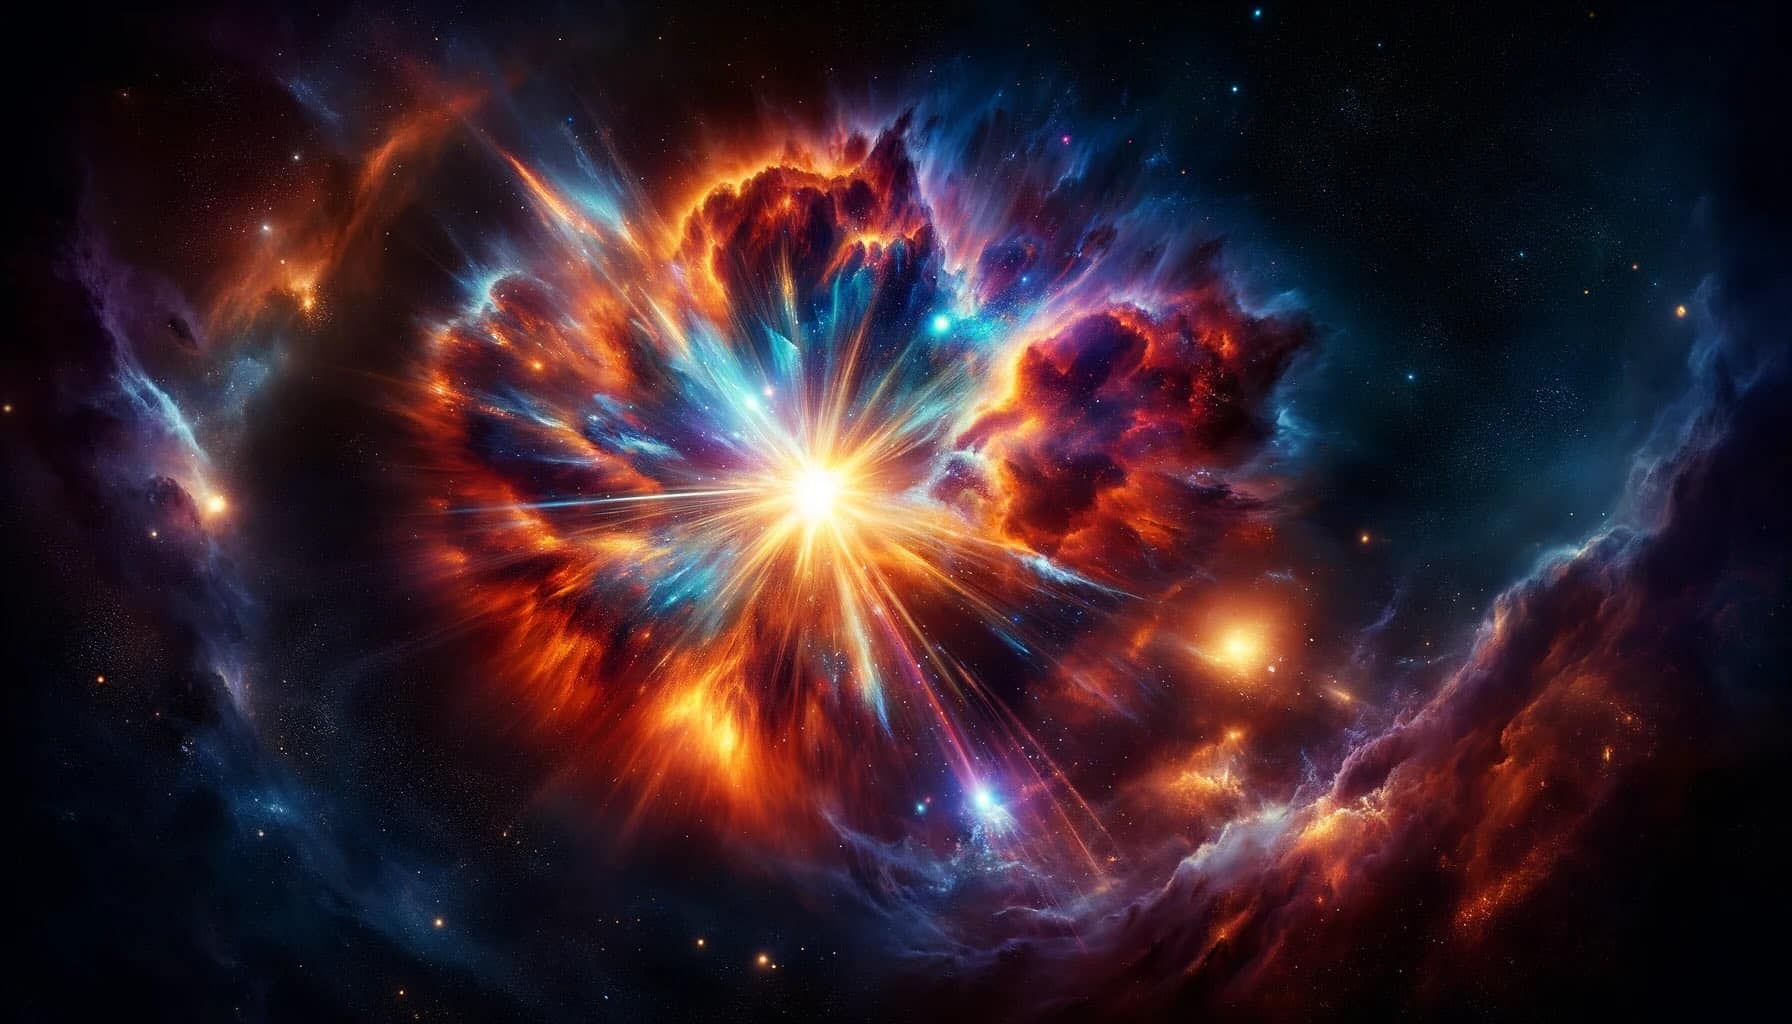 This year there will be a gigantic explosion in space and you will be able to see it

